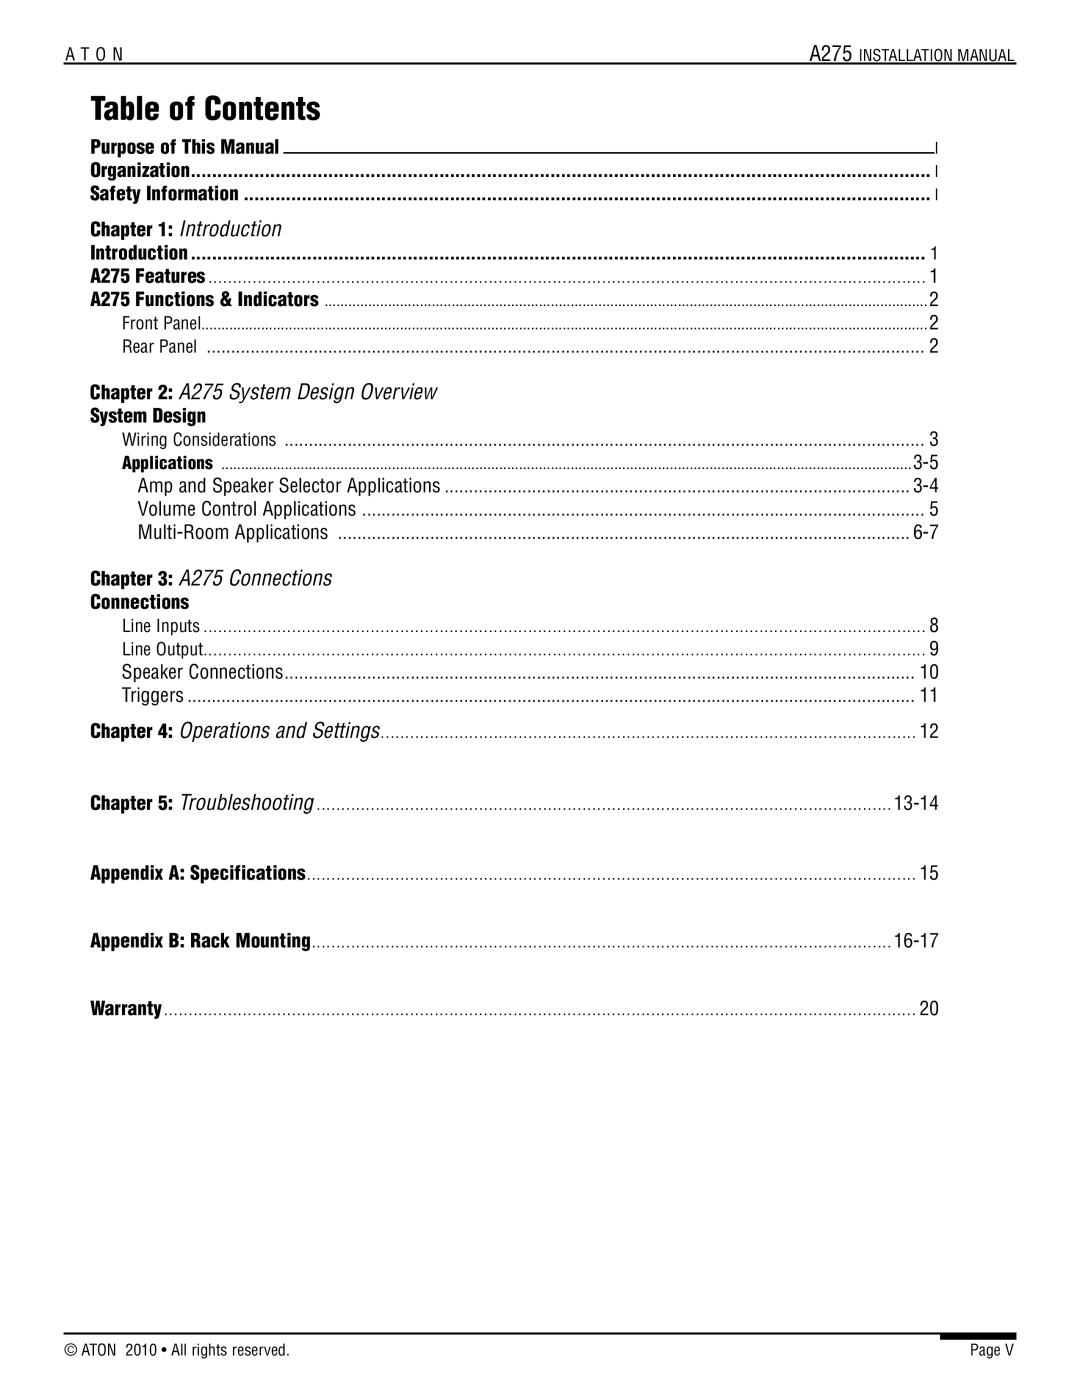 ATON installation manual Table of Contents, Introduction, A275 System Design Overview, A275 Connections 